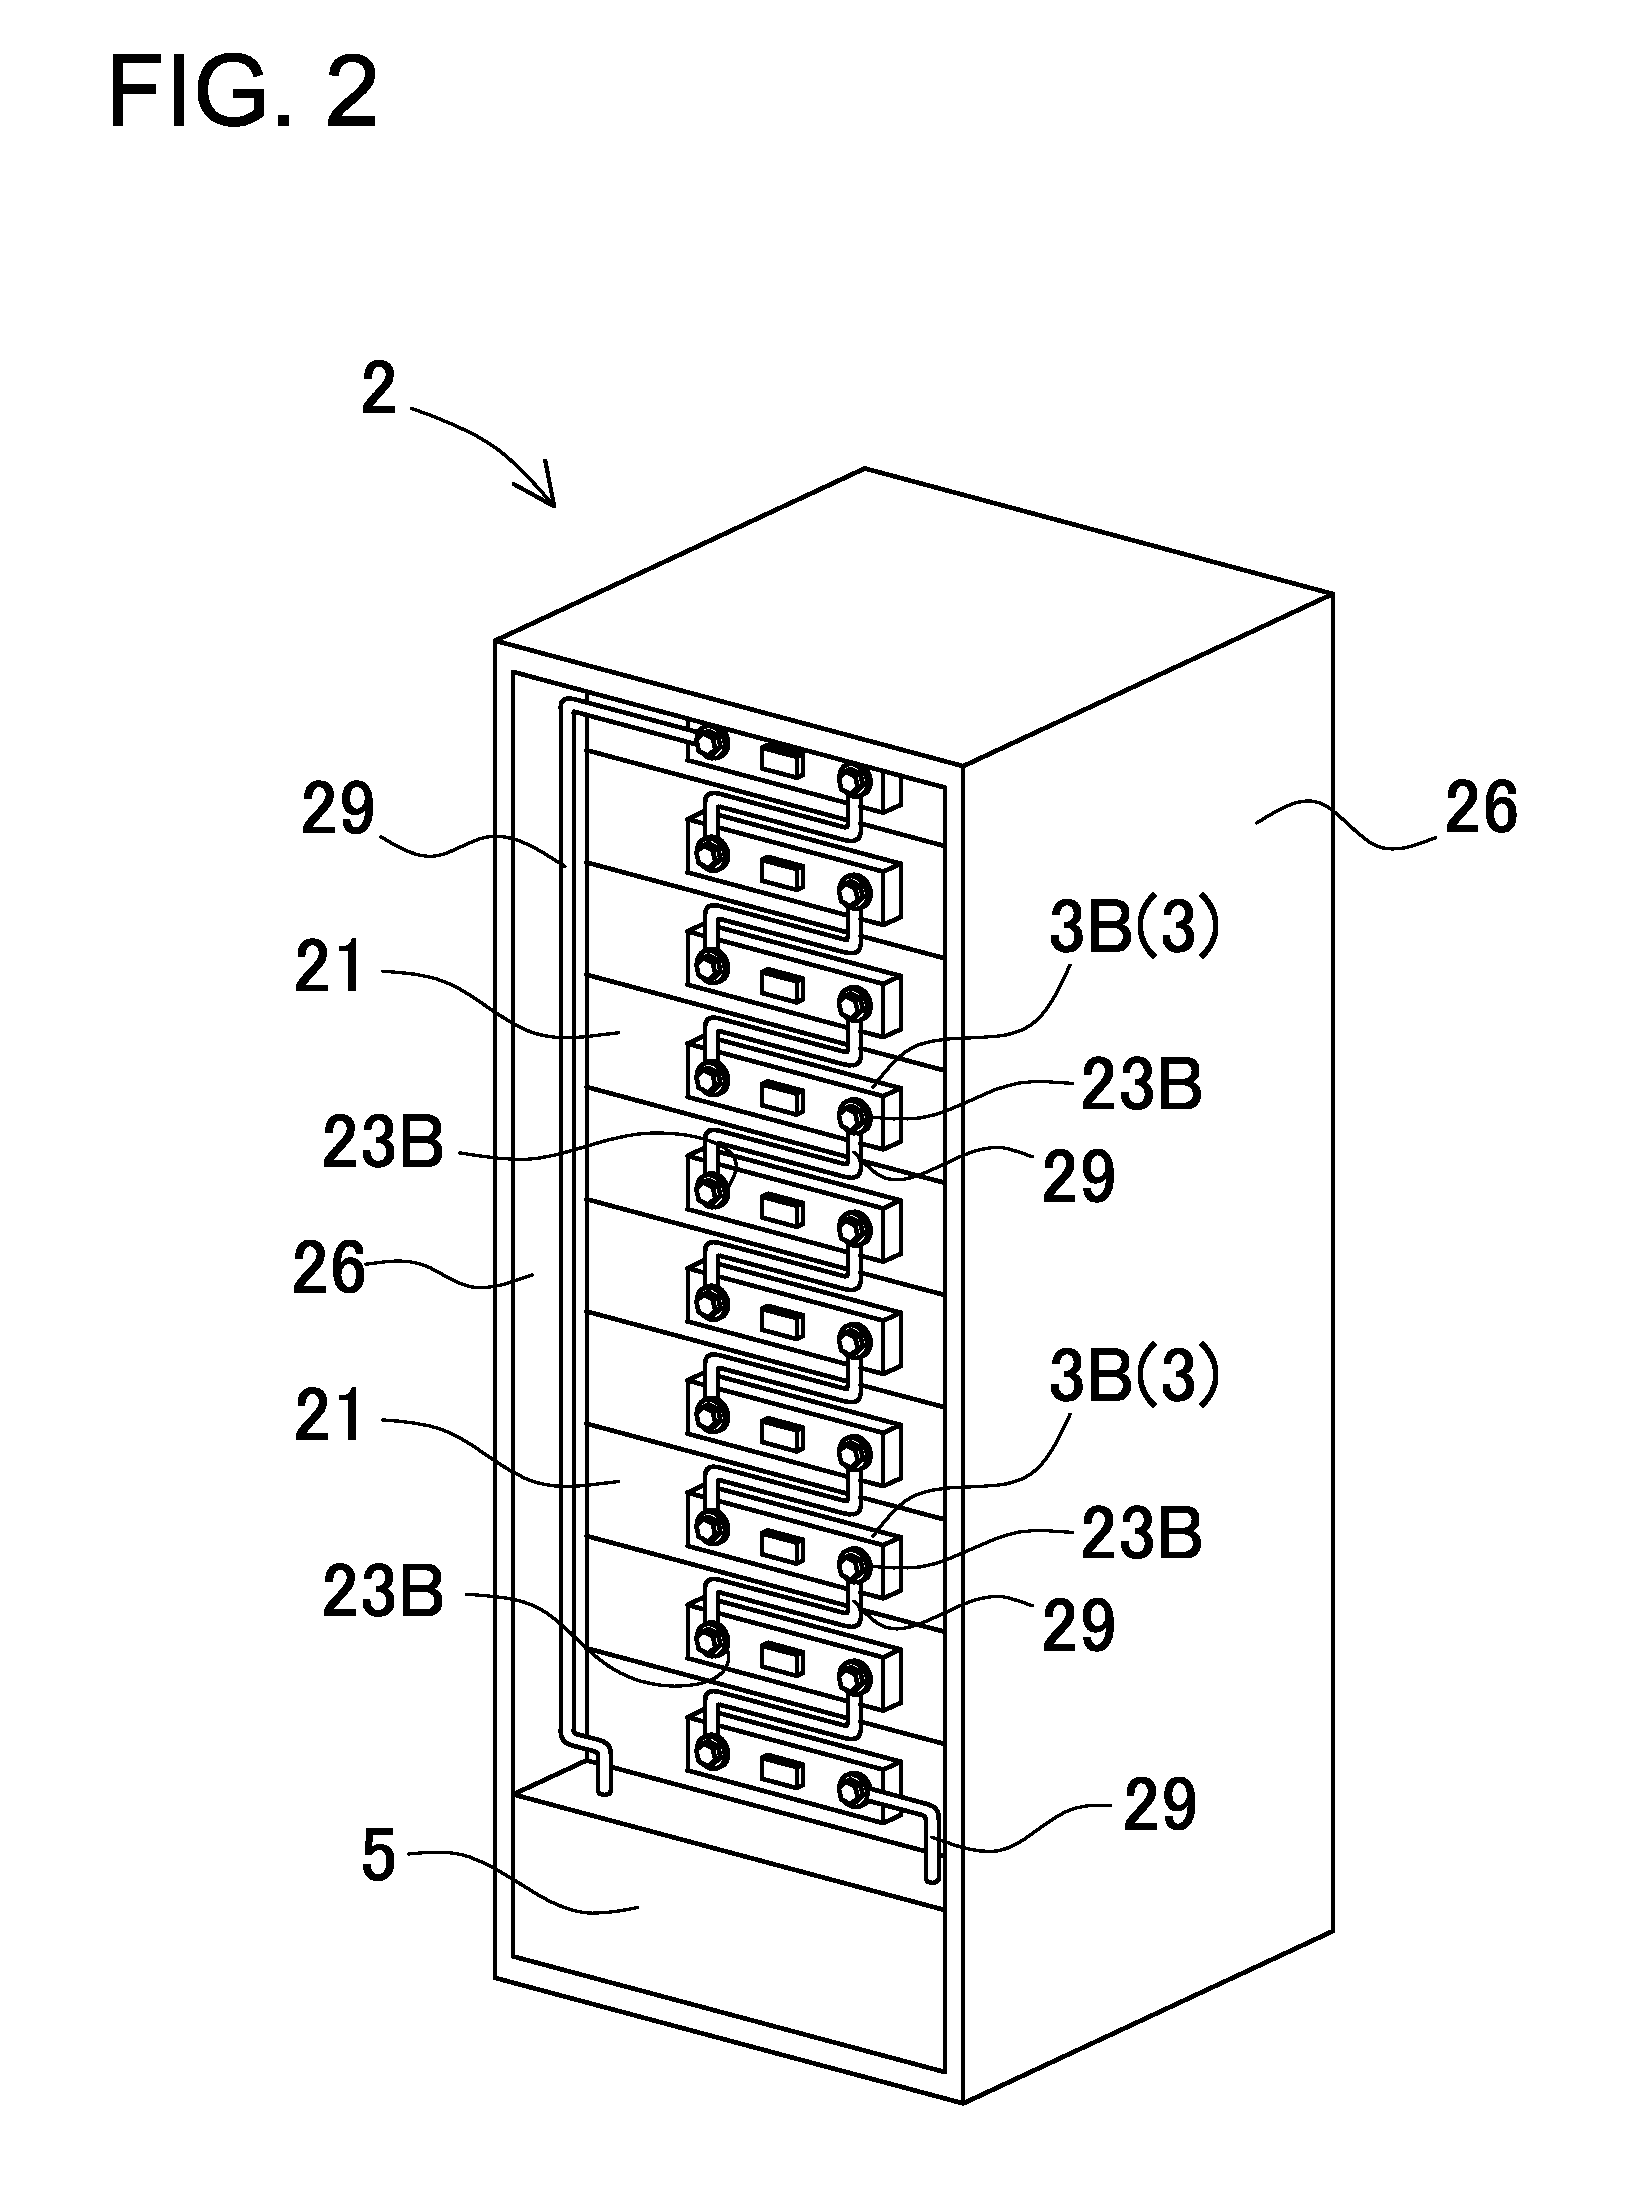 Rack-mount power supply device and battery pack including detachable connector